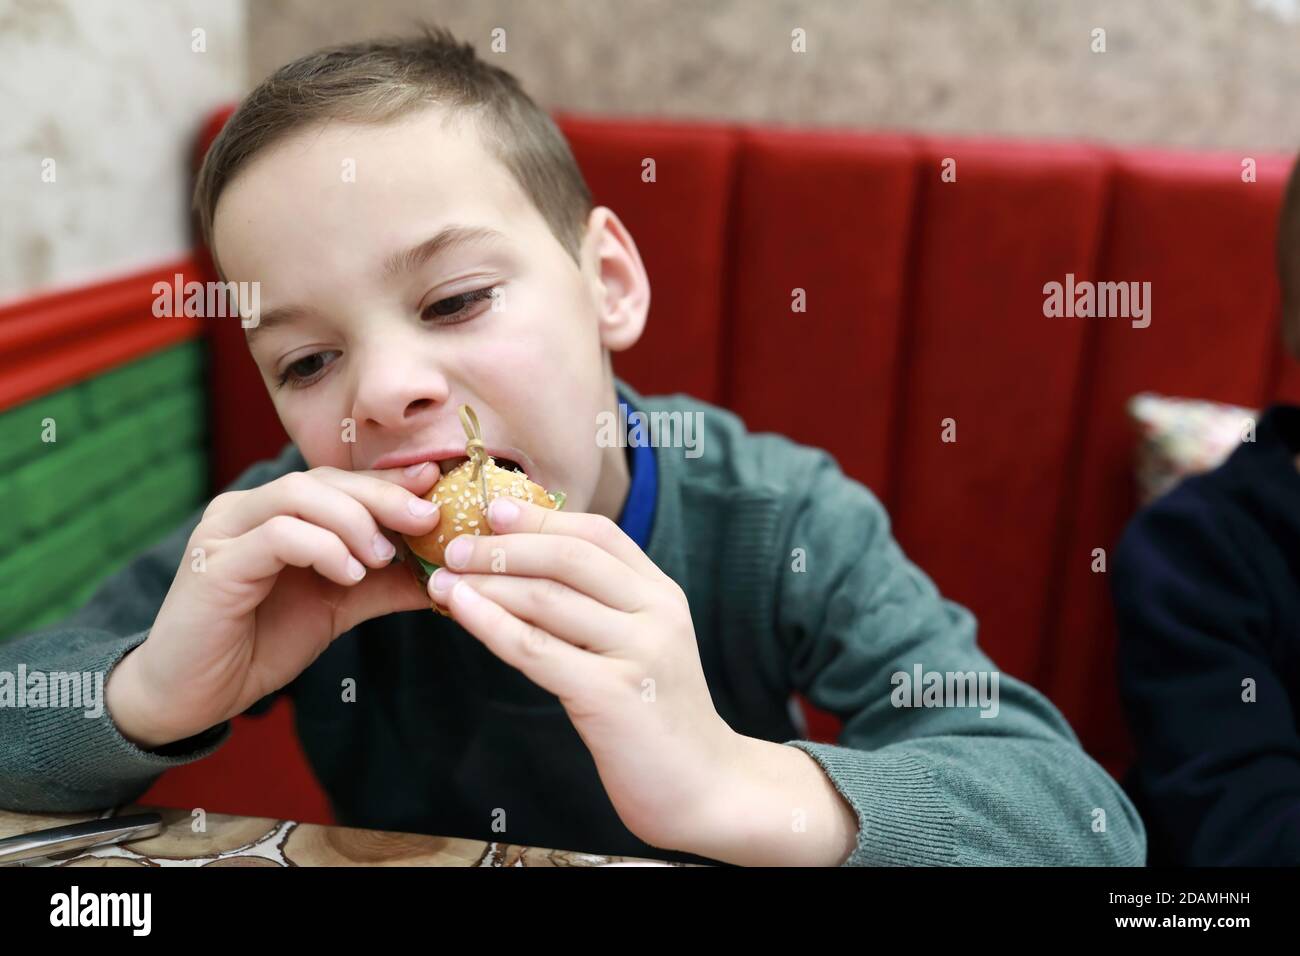 Child eating mini burger in a restaurant Stock Photo